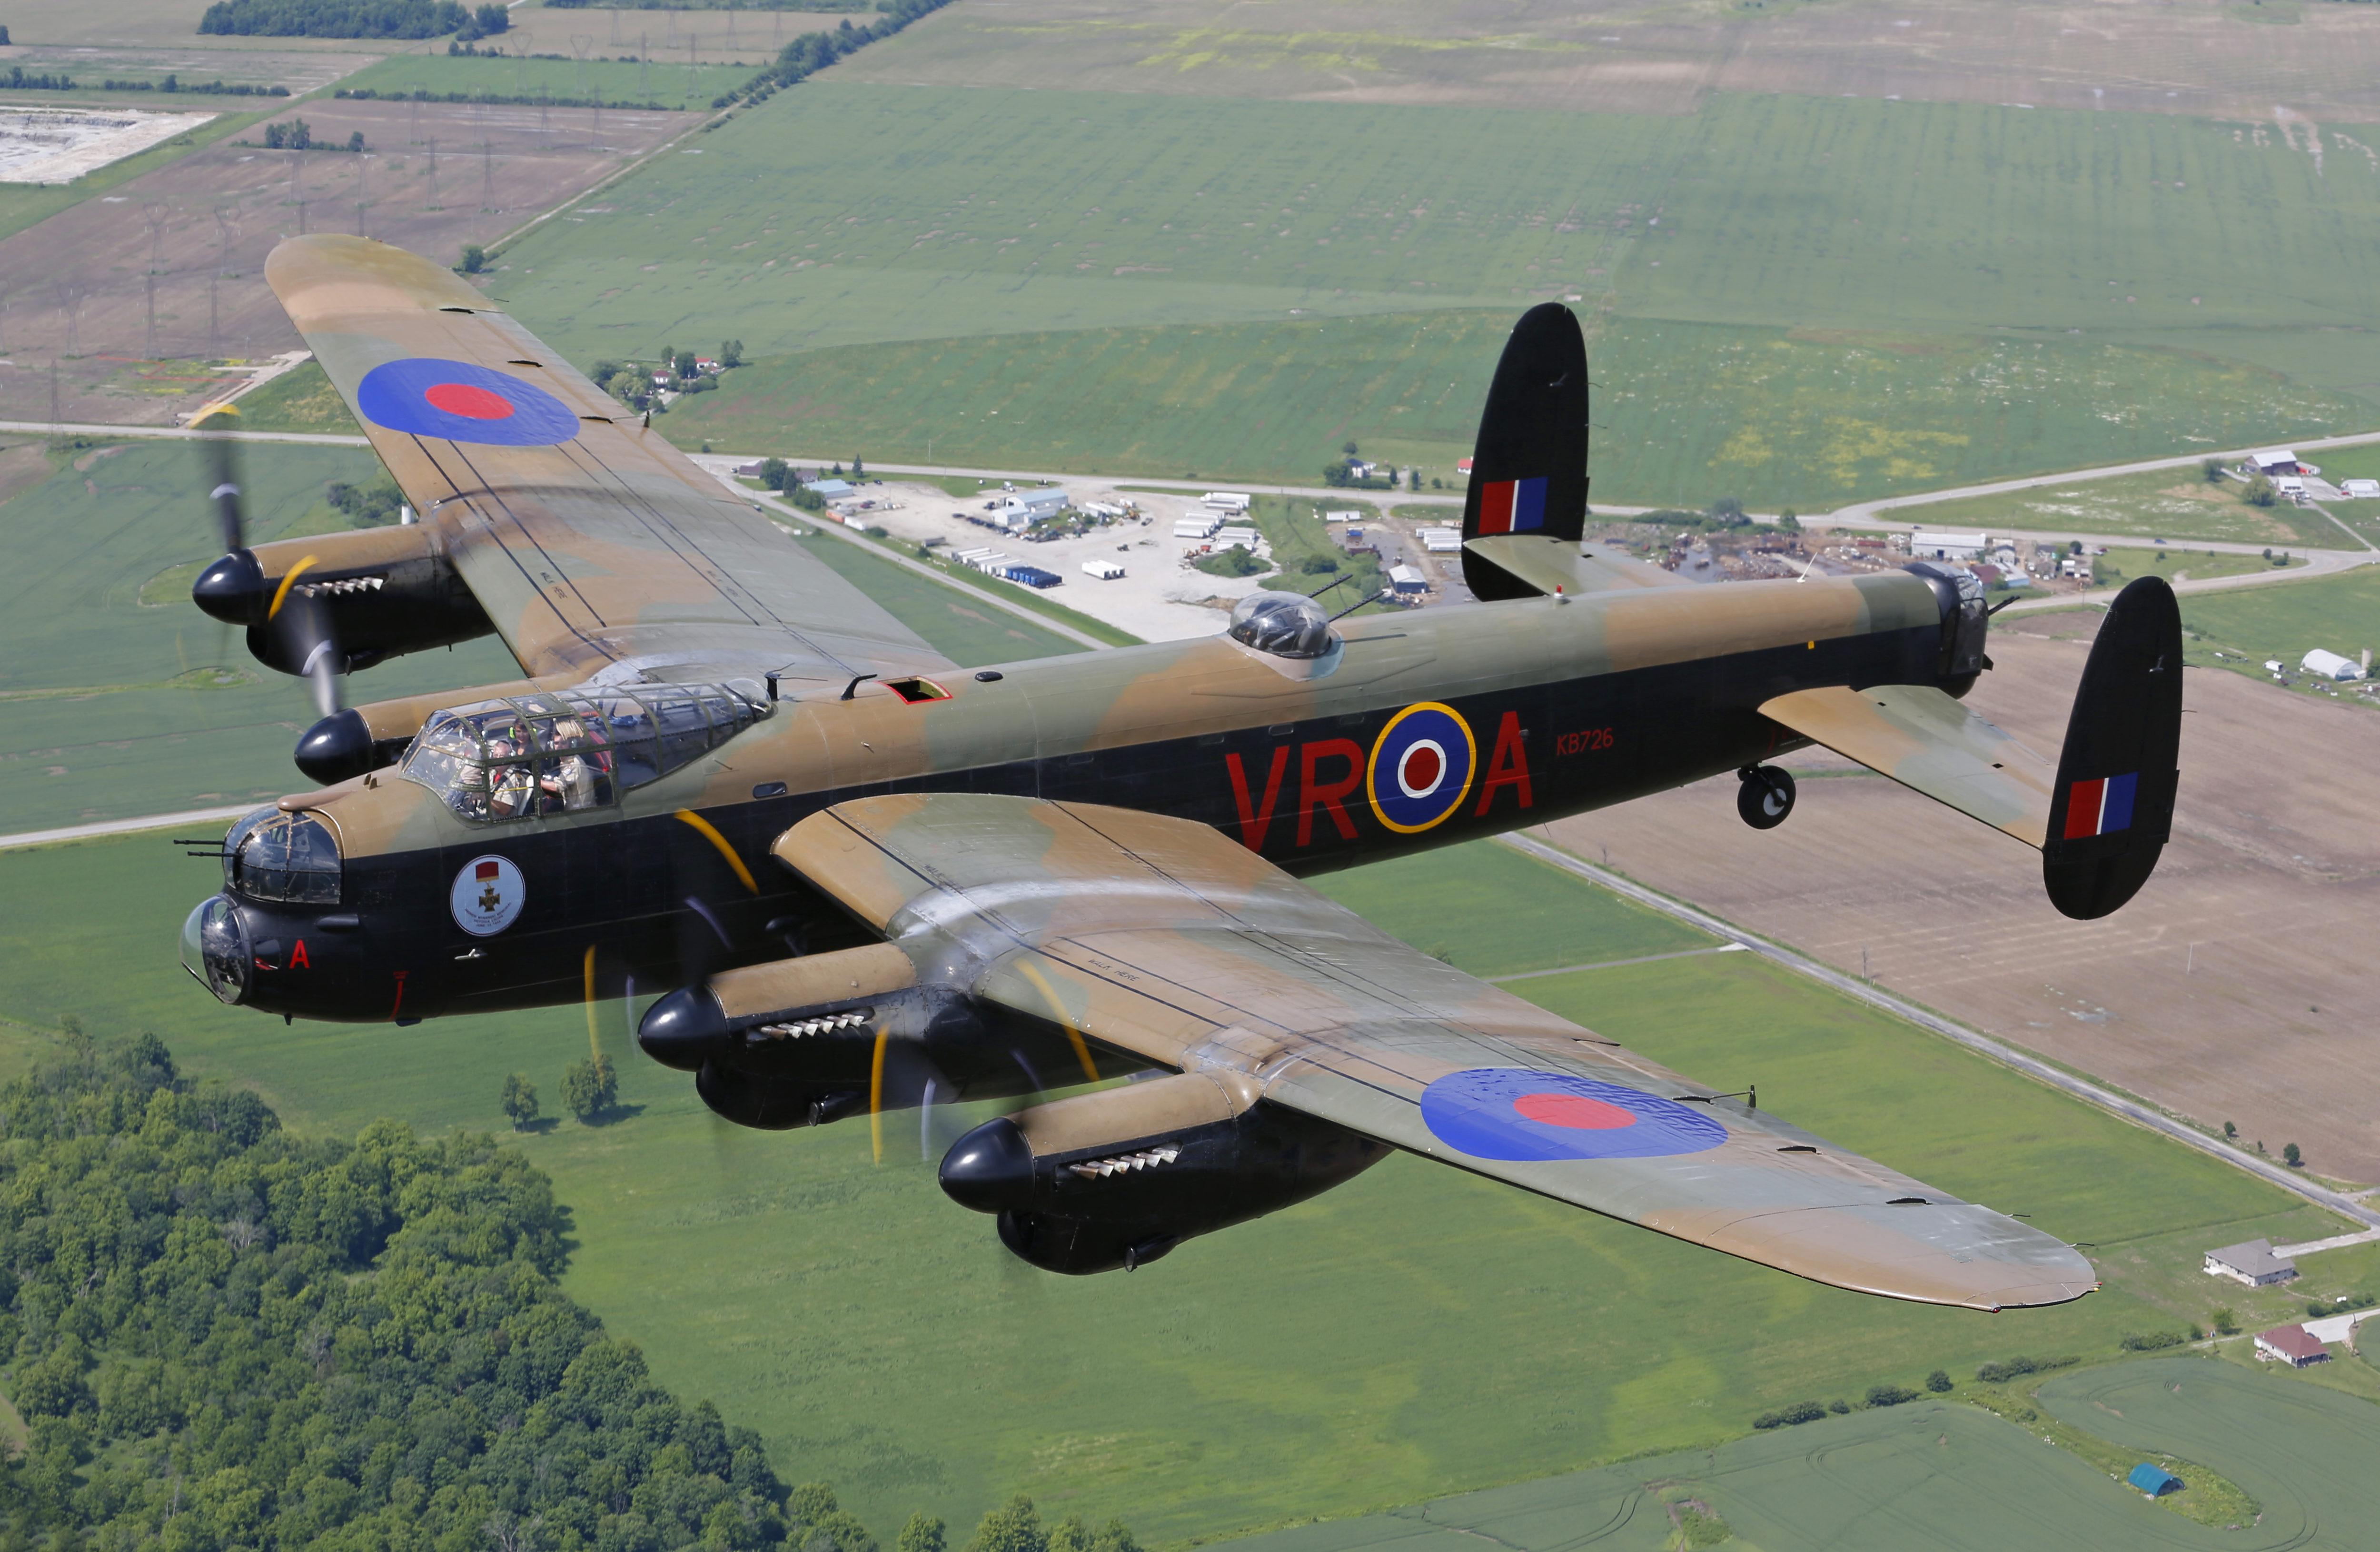 The Museum's Avro Lancaster will take part in the commemorative flypast over southwest Ontario, honouring the 75th anniversary of D-Day. Doug Fisher/CWHM Photo